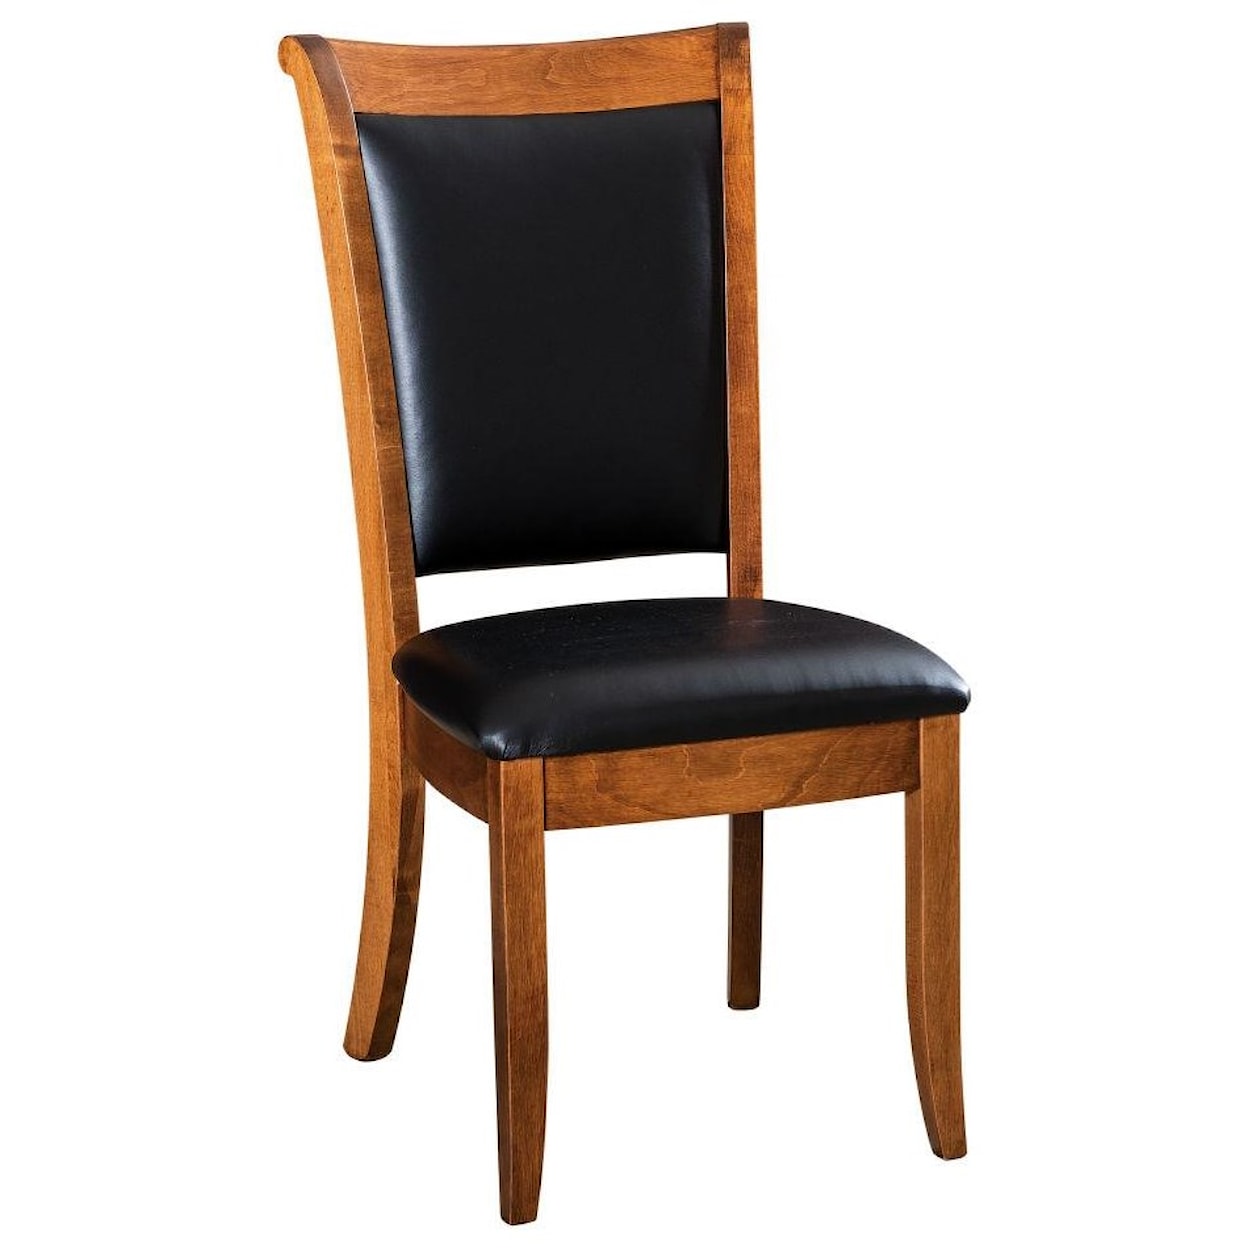 F&N Woodworking Kimberly Side Chair